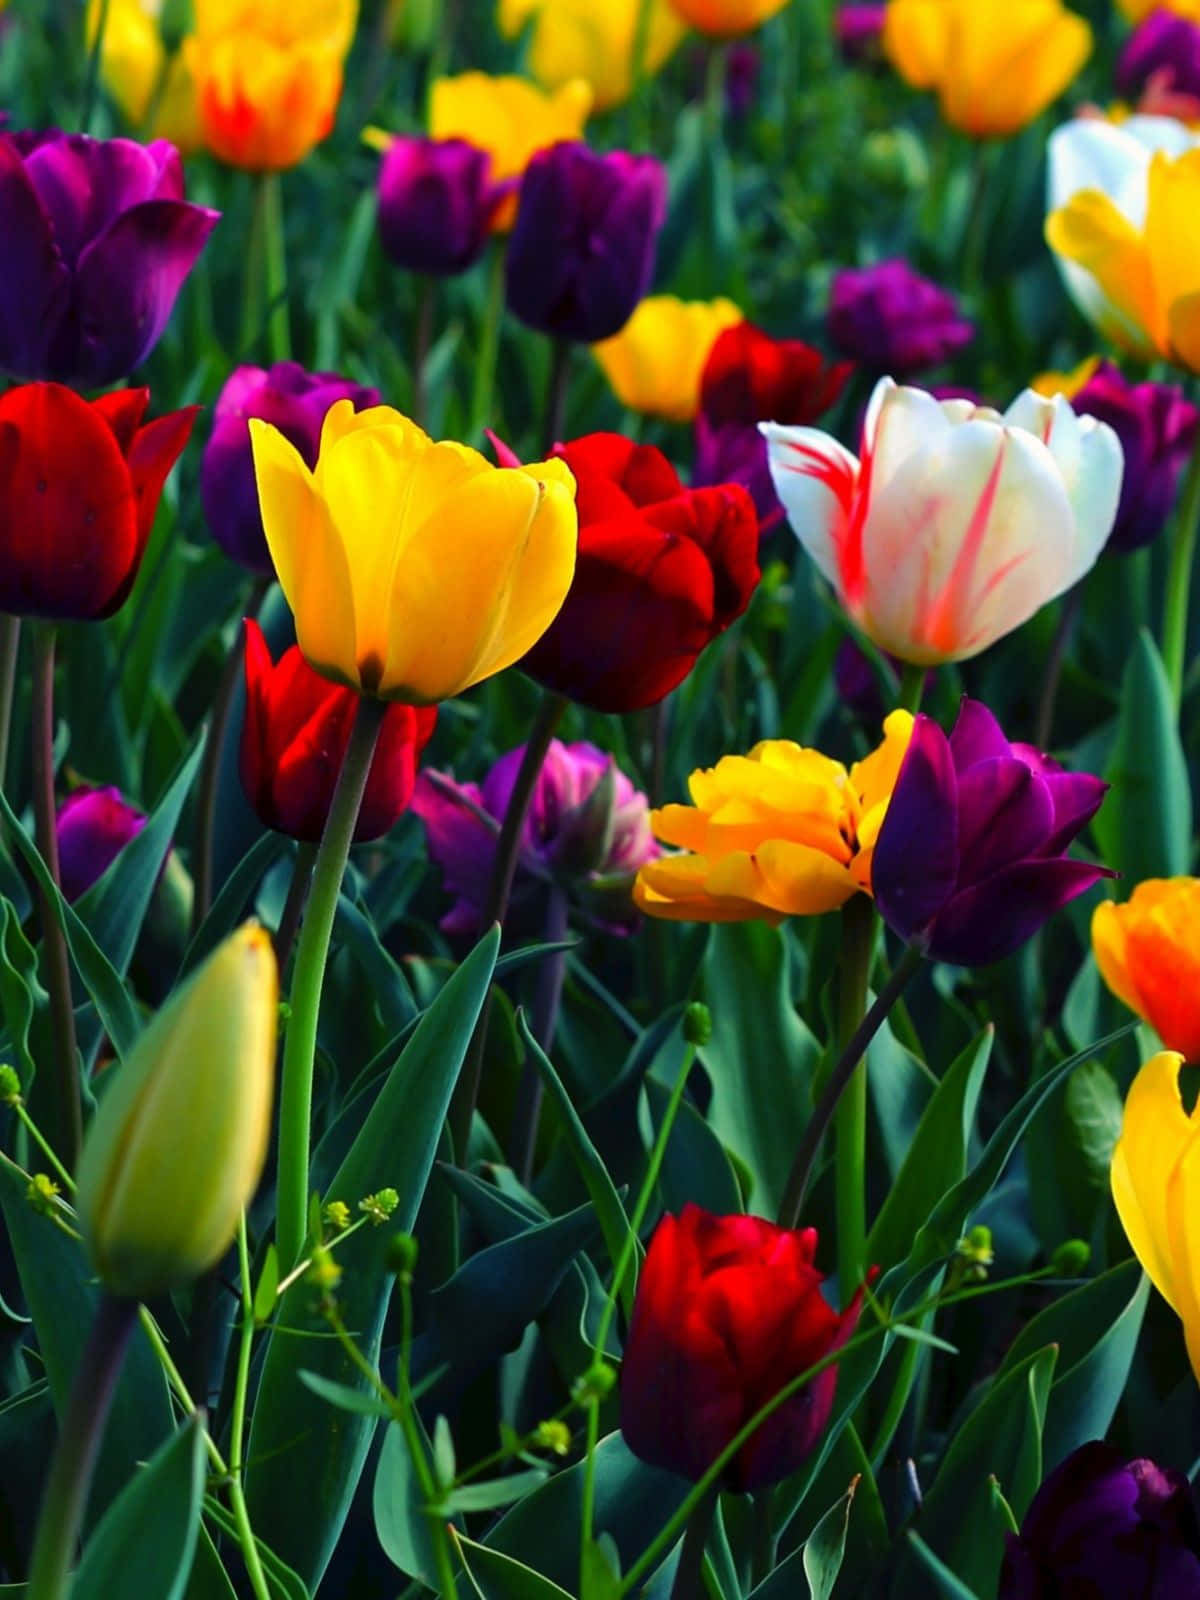 Vibrant and Colorful Flowers in Full Bloom Wallpaper